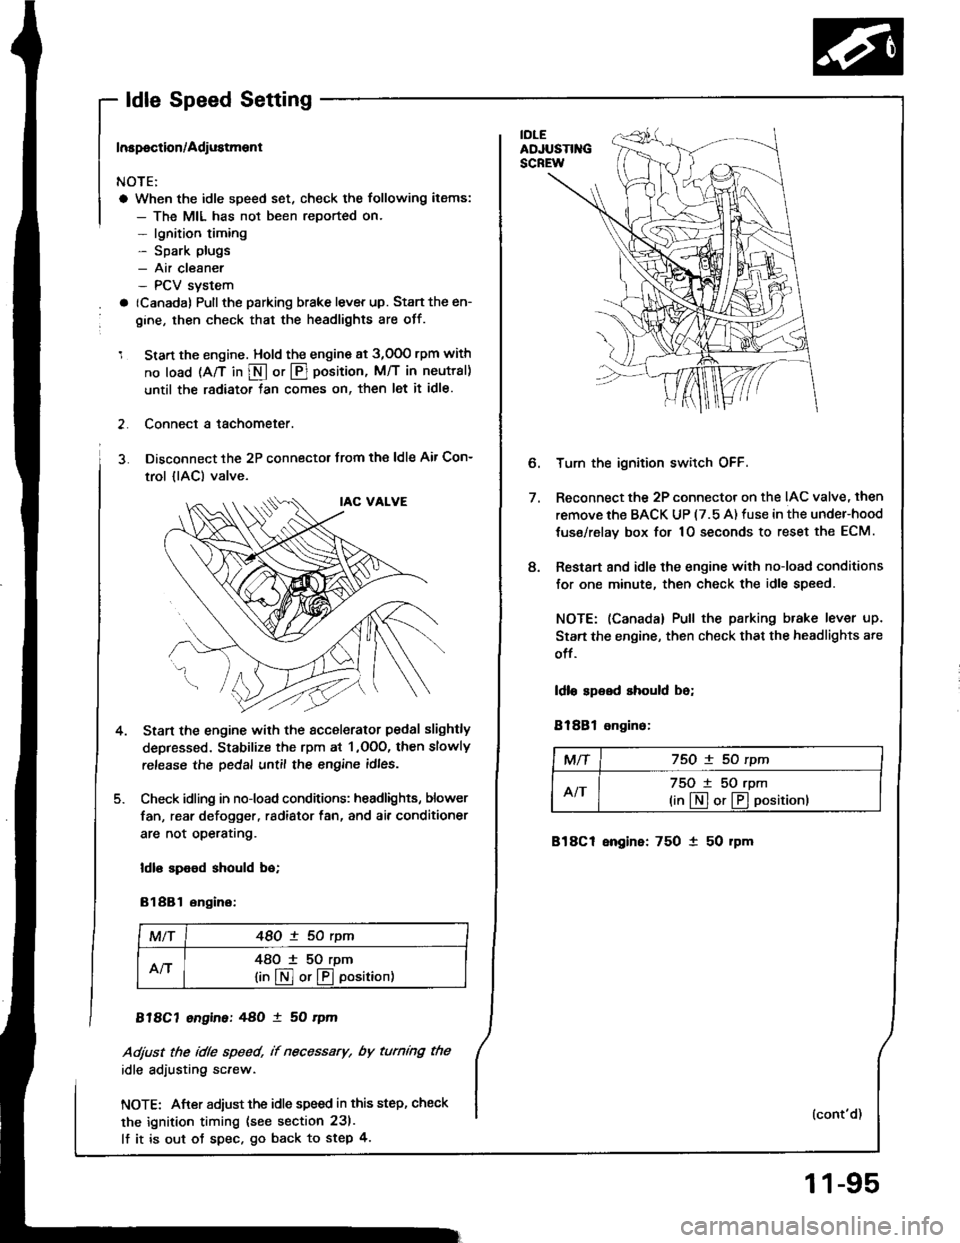 HONDA INTEGRA 1994 4.G User Guide - ldle Speed Setting
Inspoction/Adiustment
NOTE:
a When the idle speed set, check the following items:
- The MIL has not been reported on.- lgnition timing- Spark plugs- Air cleaner- PCV svstem
a (Can